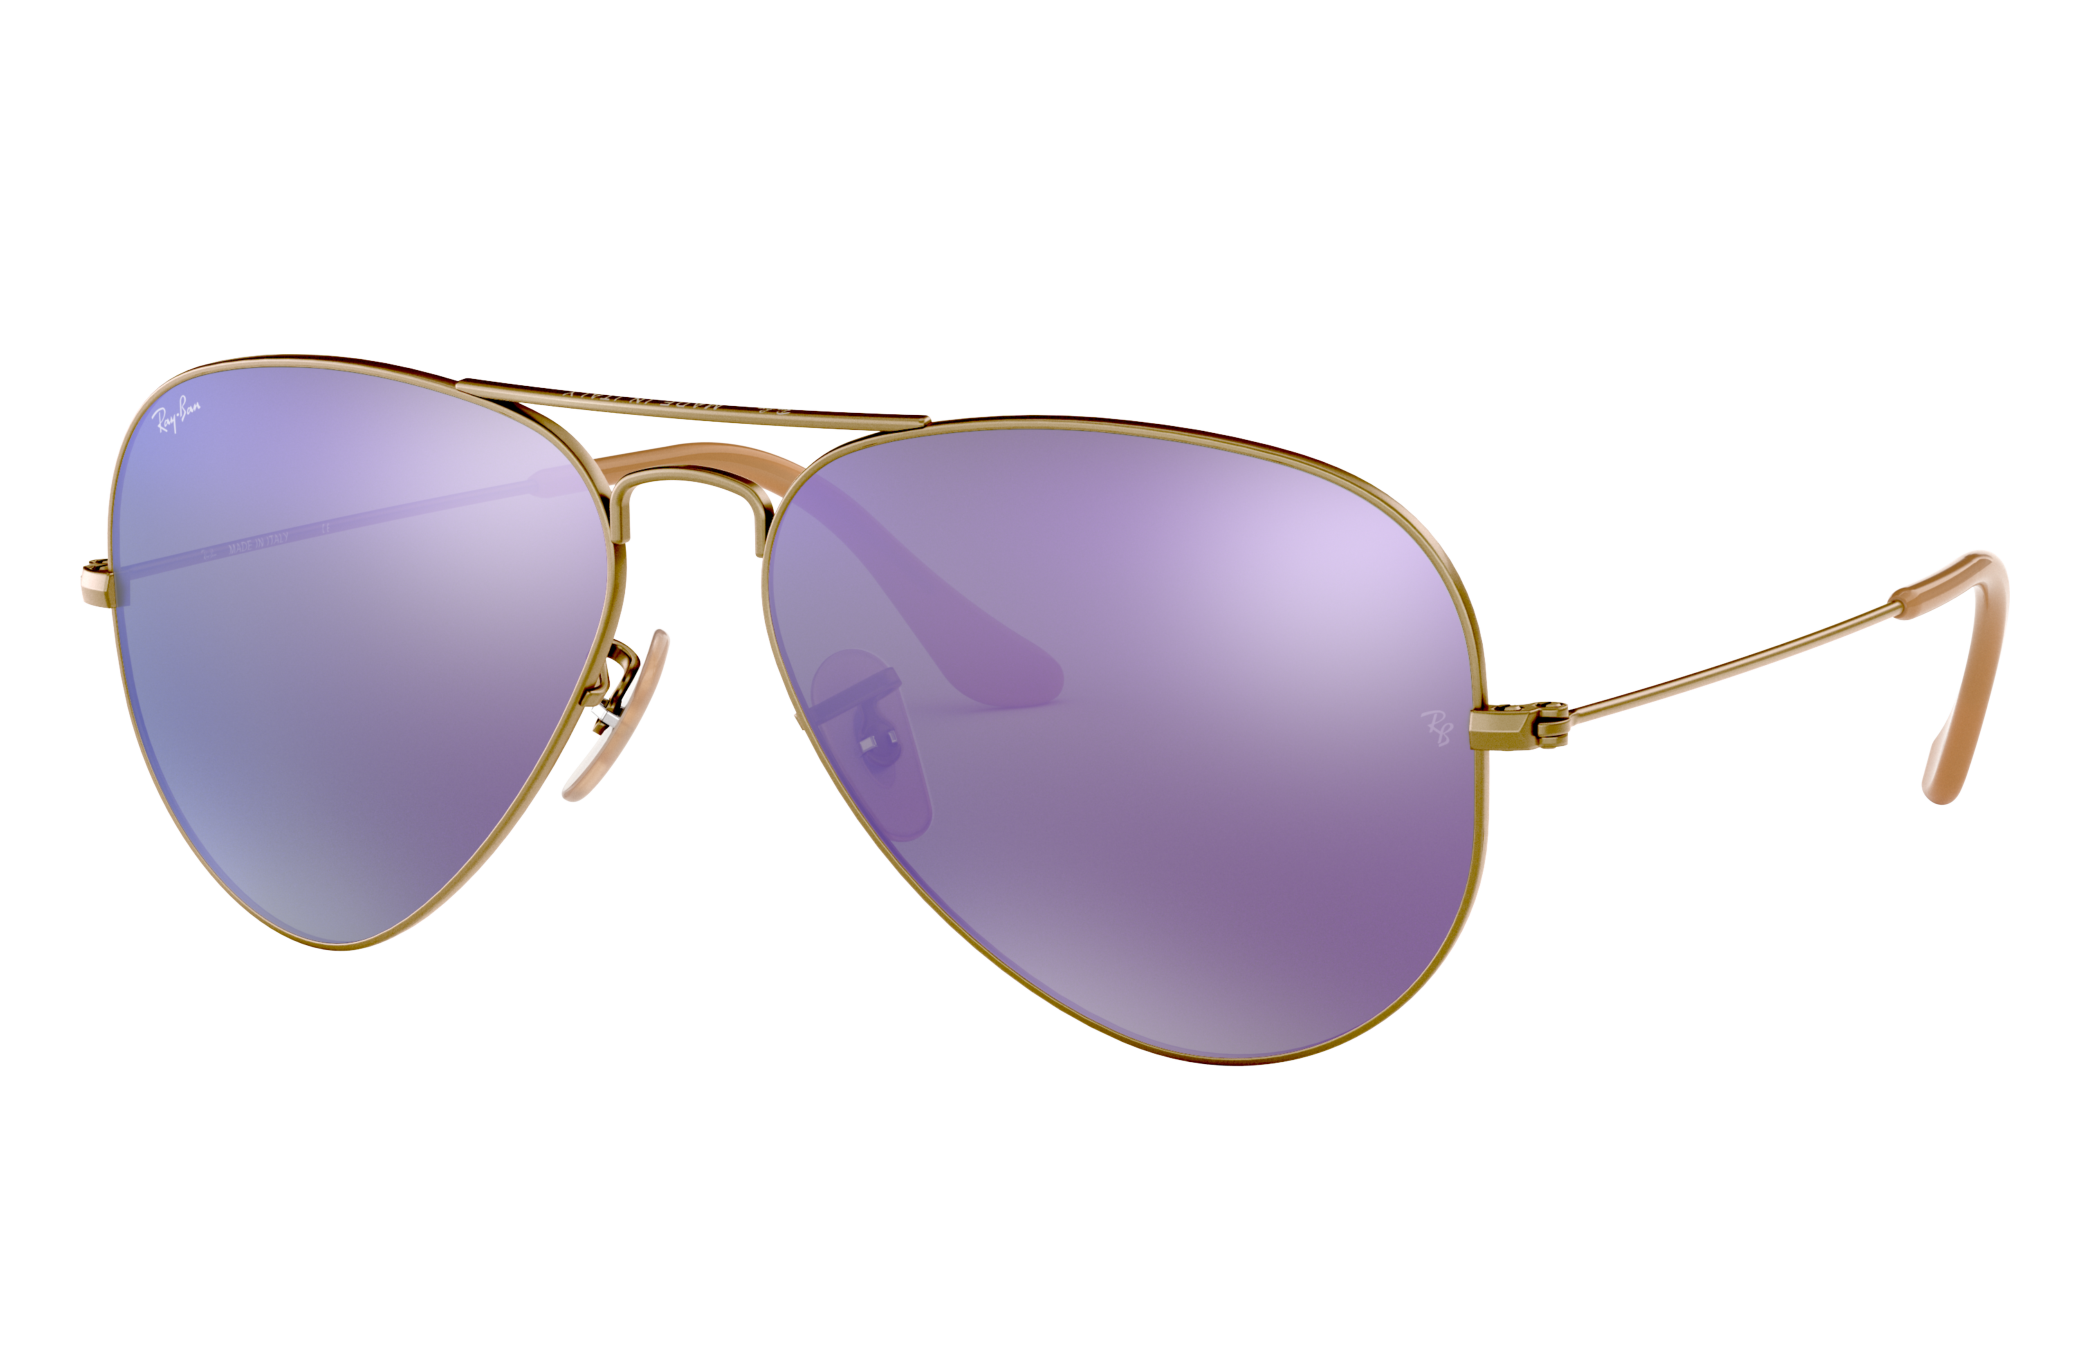 Aviator Flash Lenses Sunglasses in Bronze-Copper and Violet | Ray-Ban®